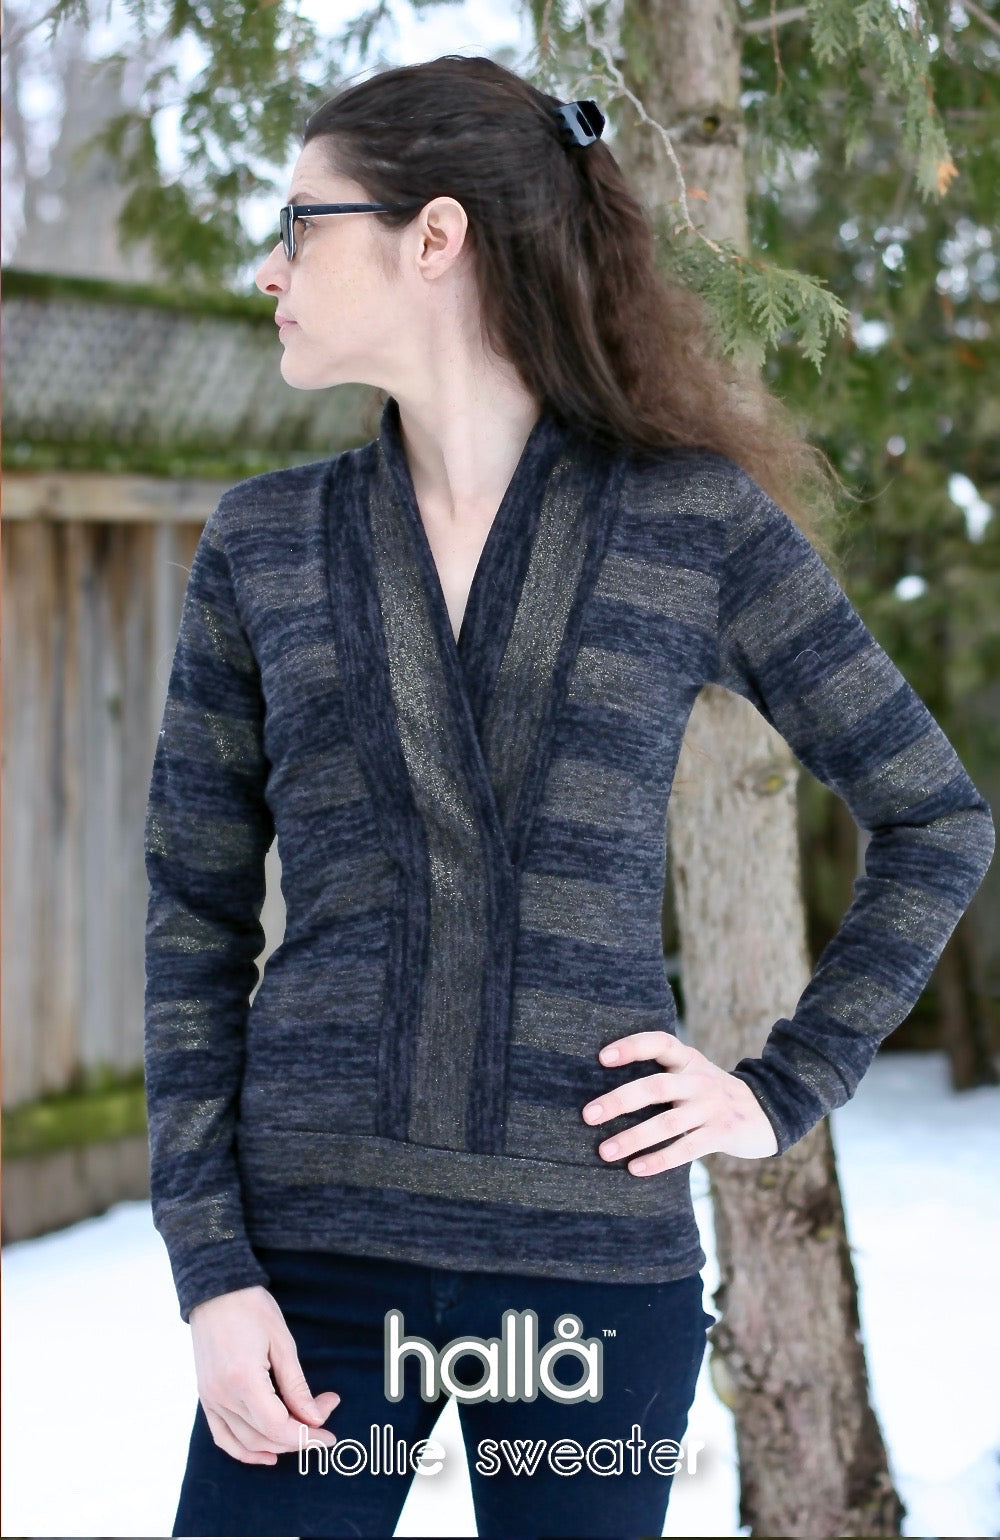 hollie sweater & cardigan for women